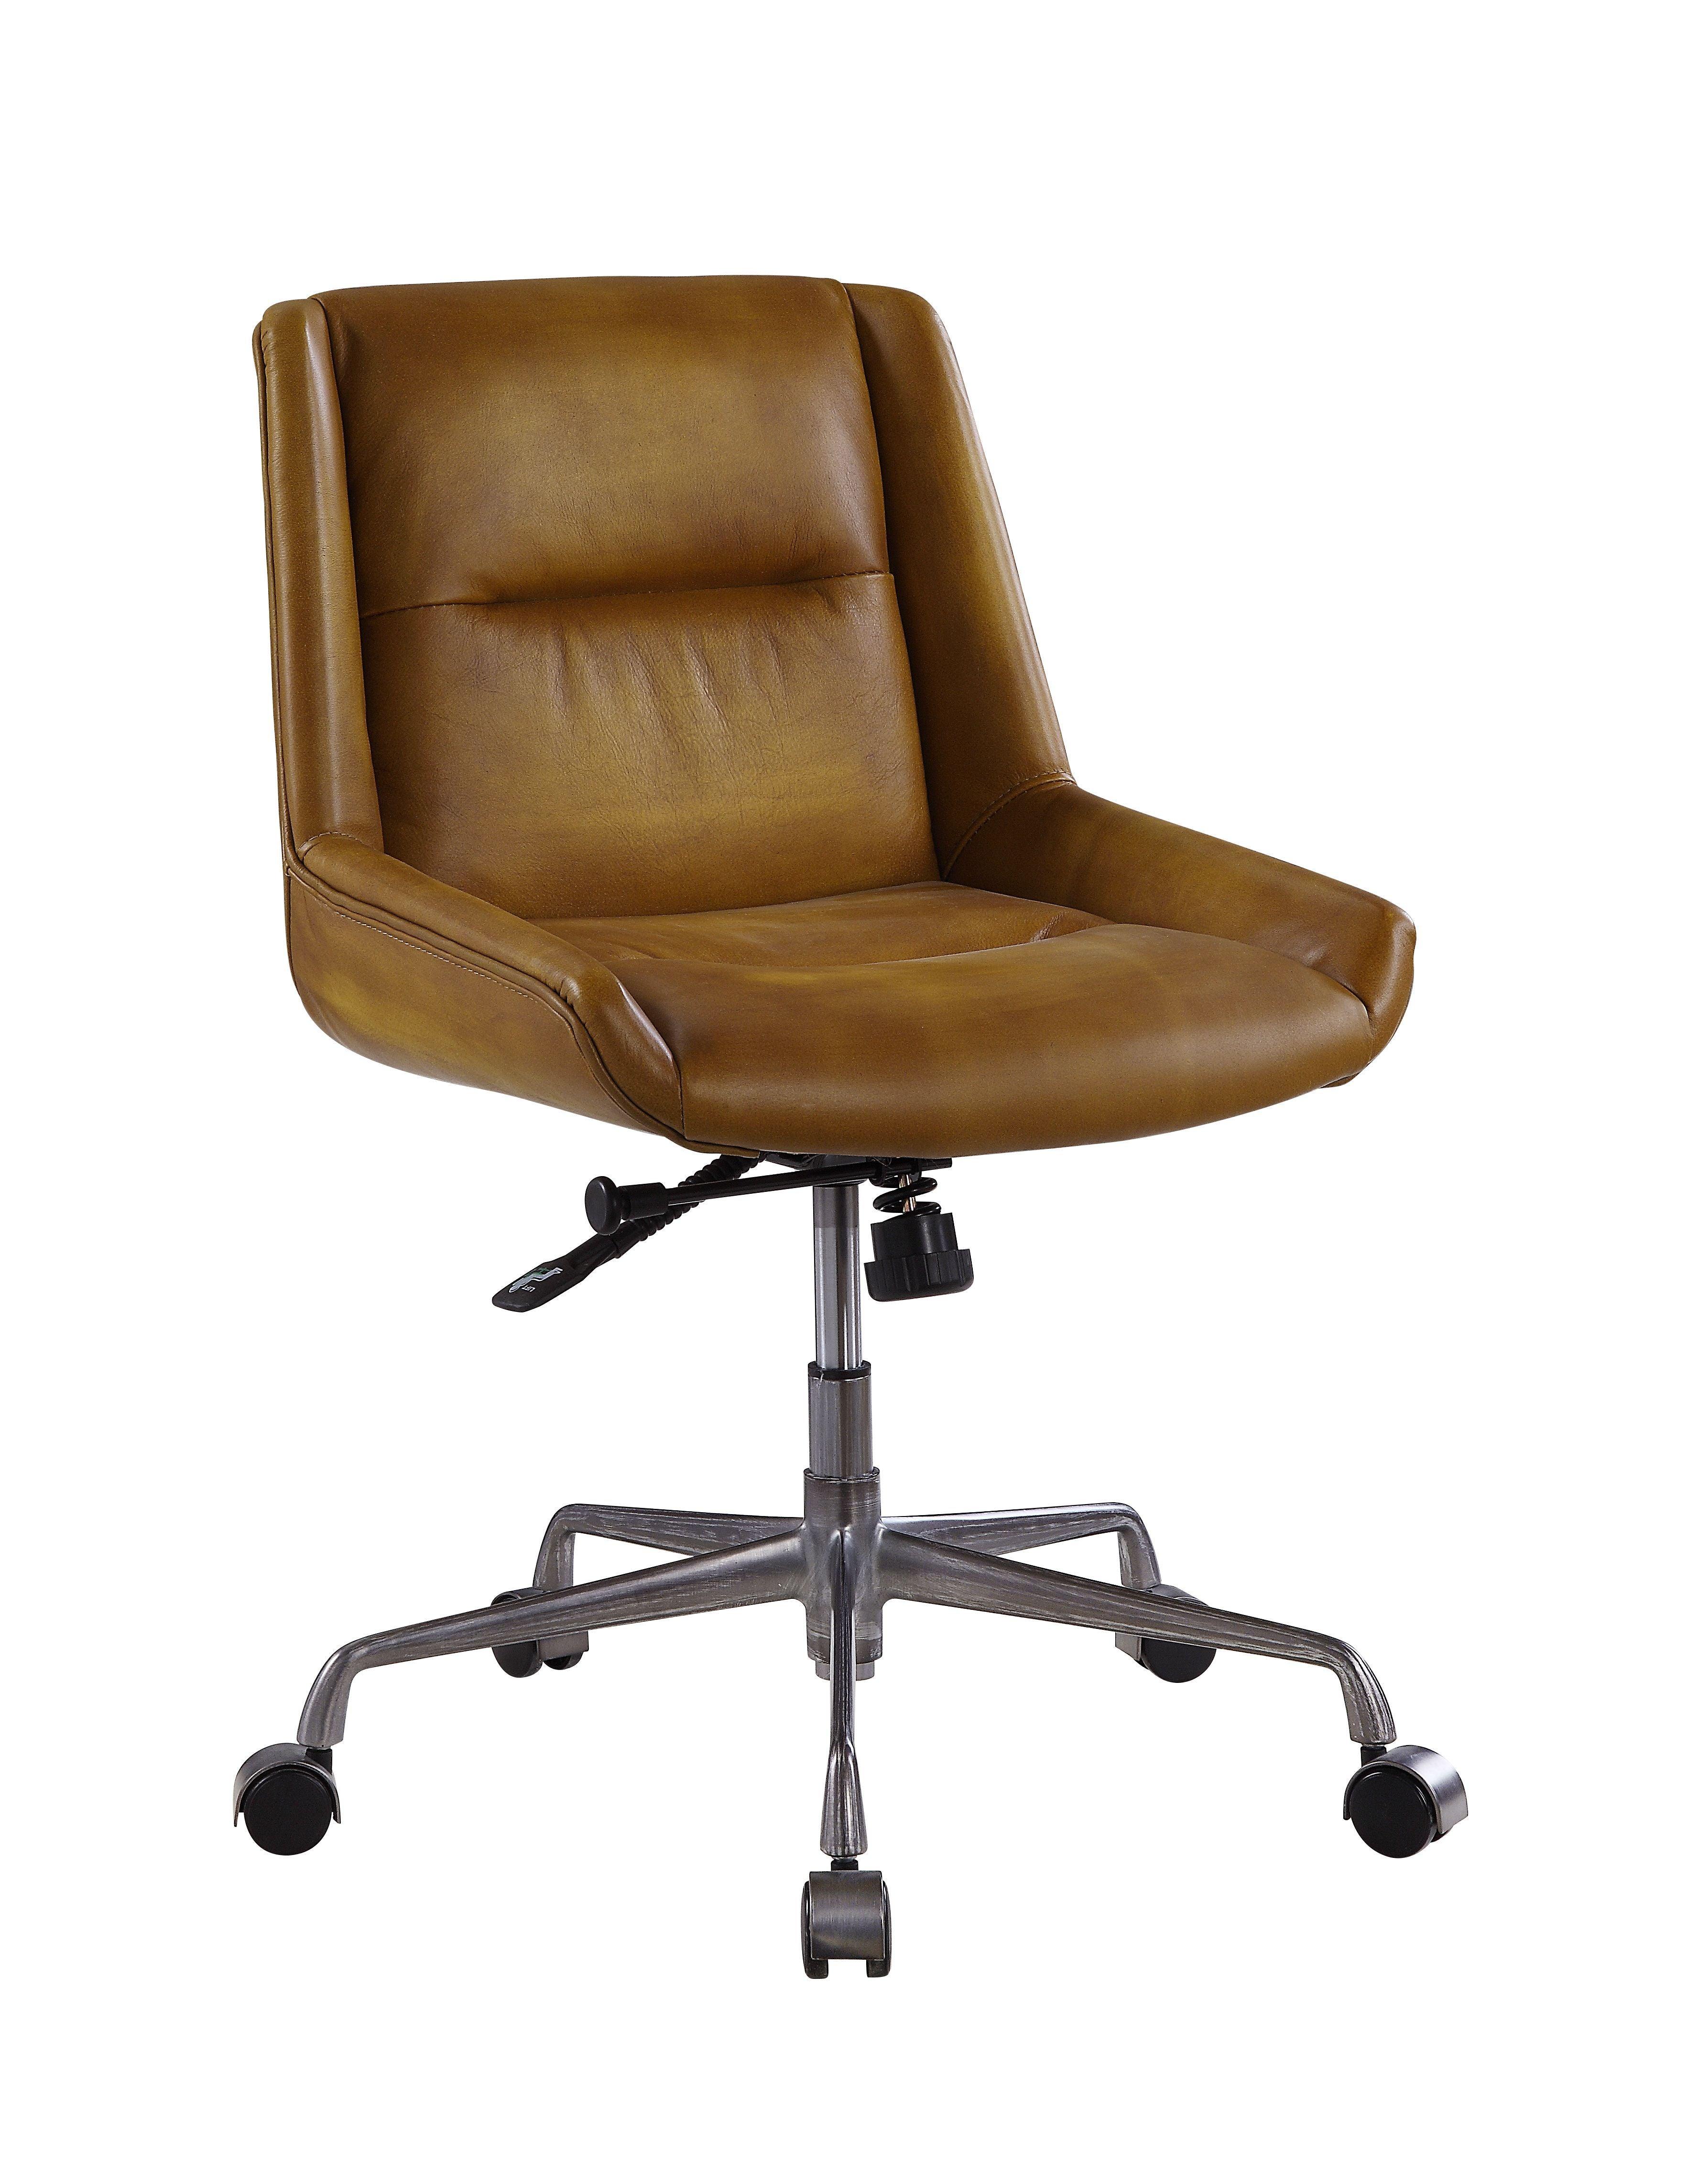 ACME - Ambler - Executive Office Chair - Saddle Brown Top Grain Leather - 5th Avenue Furniture